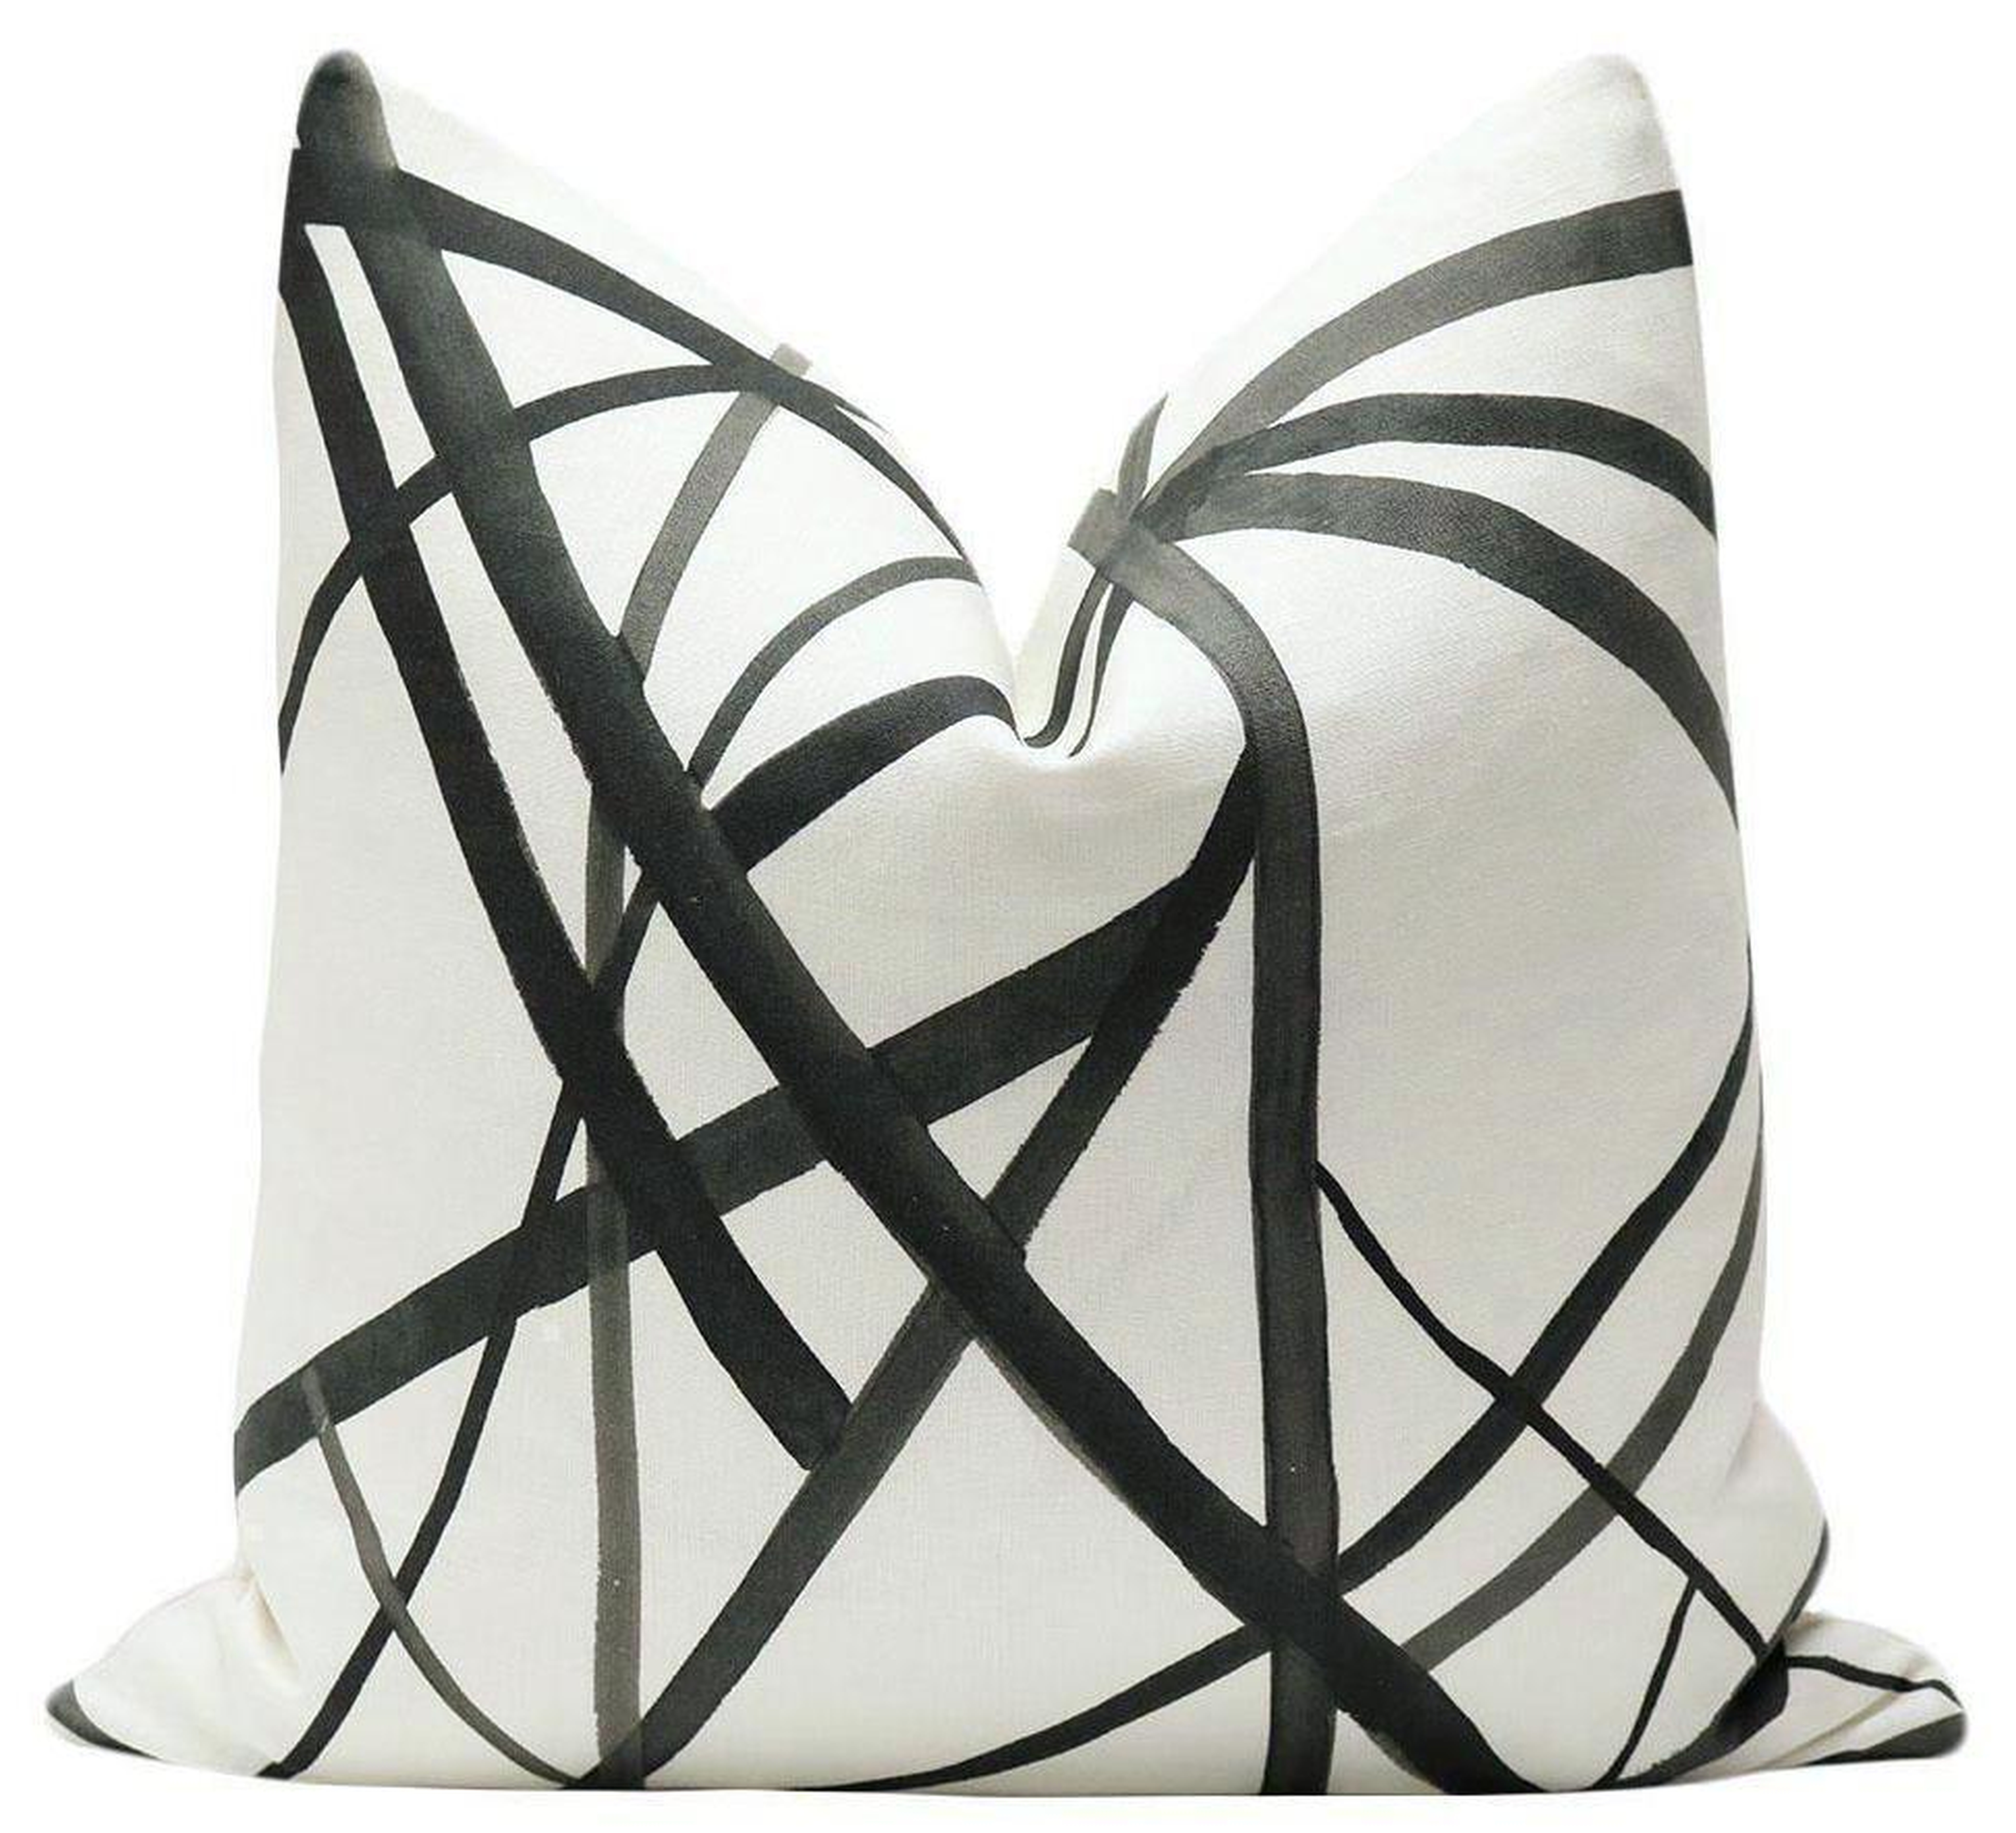 Channels // Ebony + Ivory Pillow Cover - 20" x 20" - Little Design Company